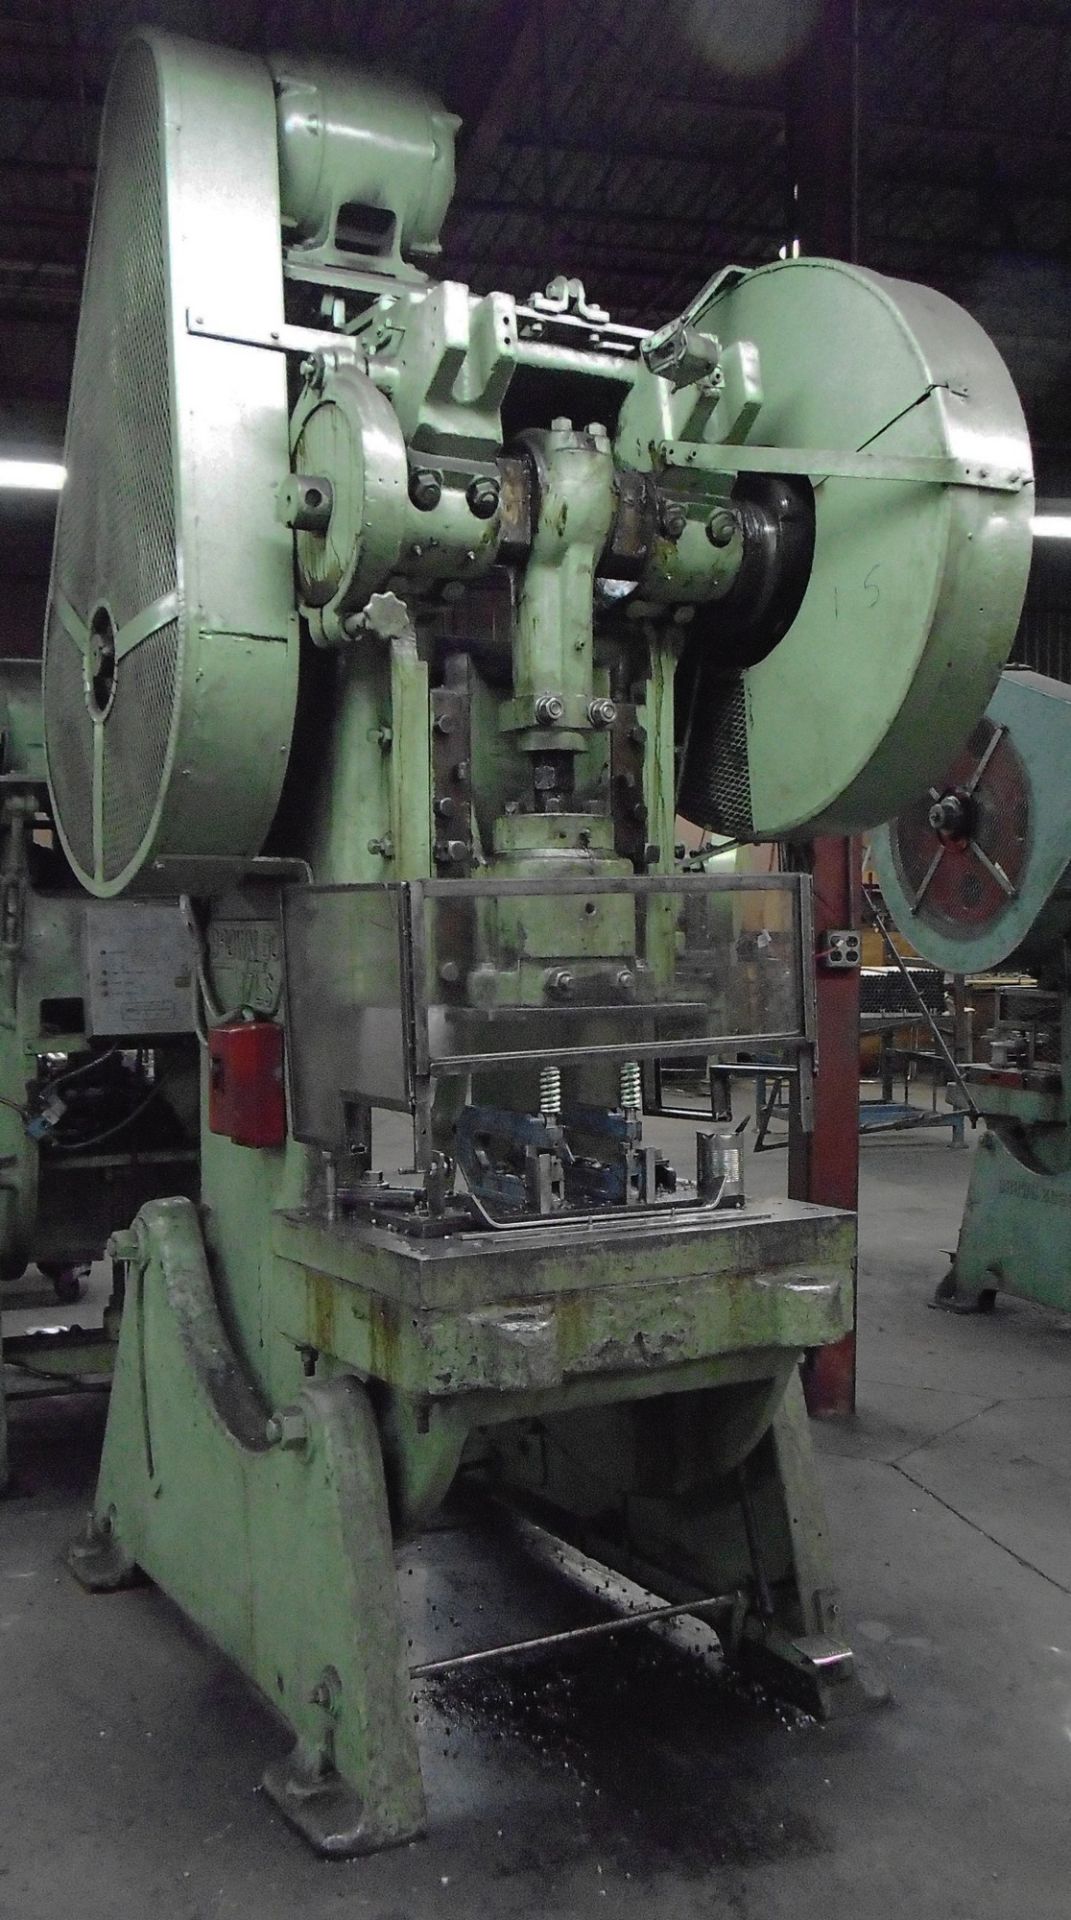 BROWN BOGGS 17LS OBI PUNCH PRESS WITH 60 TON CAPACITY, 5" STROKE, 3" RAM ADJUSTMENT, APPROX 85 SPM